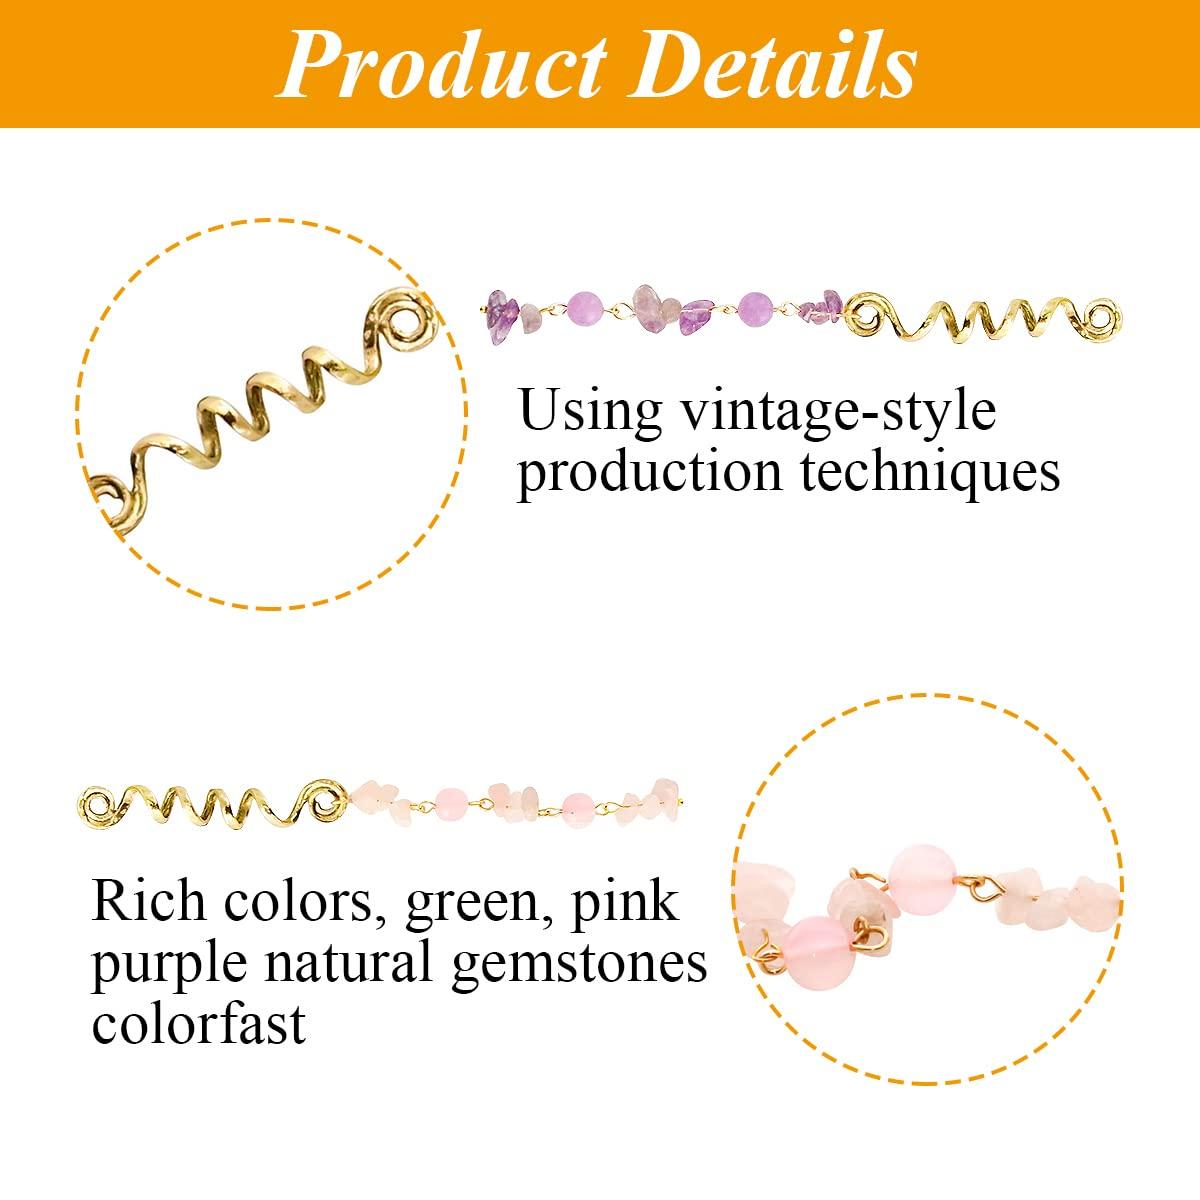 Handmade Hair Jewelry for Braids Colored Natural Stone crystal Locs tassel  Dreadlock Accessories Hair Gems for